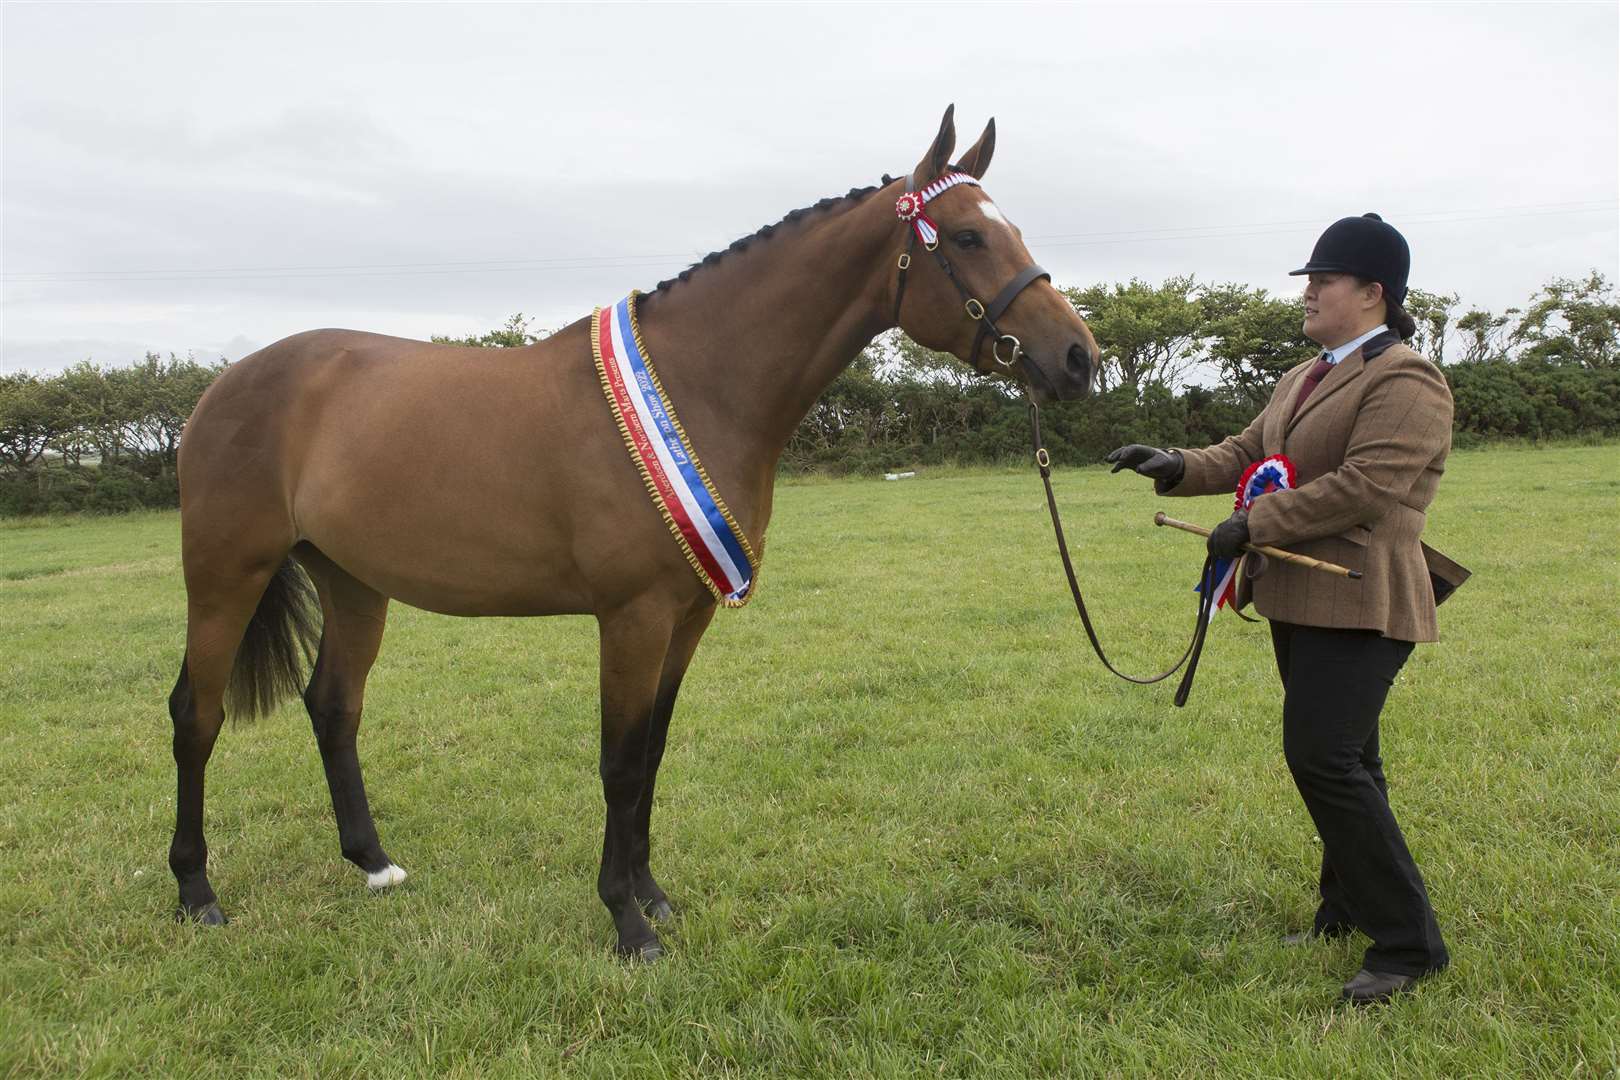 Kimmy Lai, Dempster Street, Wick, took the supreme horse championship and the champion of champions trophy with her light legged champion, Ashlea's Hollywood Showgirl, a three-year-old by Hollywood. Picture: Robert MacDonald/Northern Studios